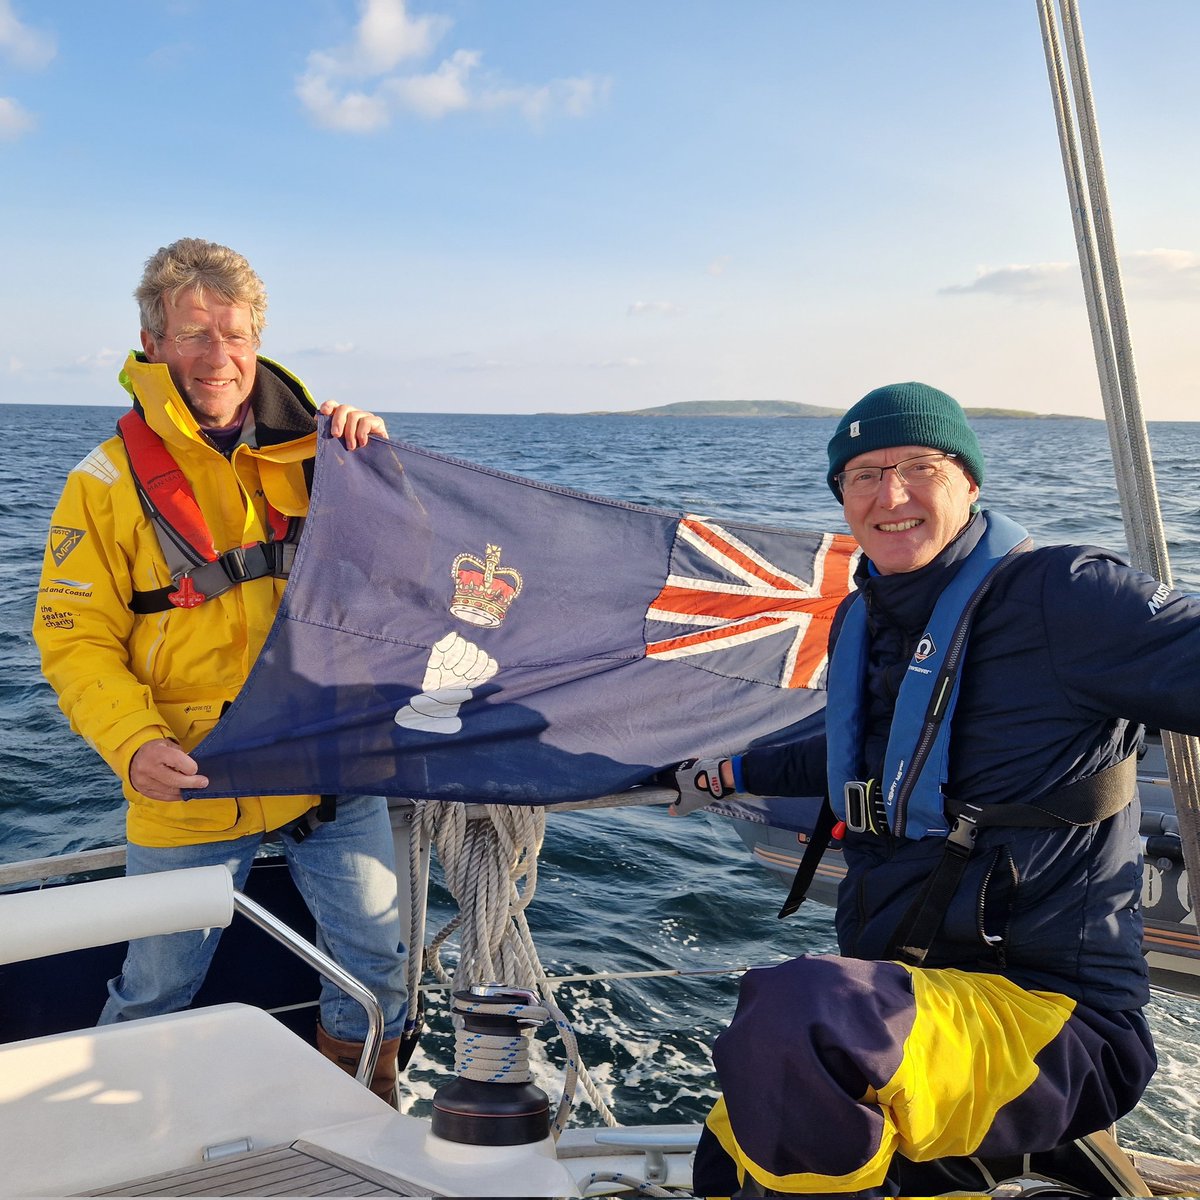 The good ship Good Dog's journey continues...
Mark Ashley-Miller (ex @TheWelshCavalry), sends greetings from Ireland where he and Patrick Polglase (@WessexYeomanry) are about to enter Roundstone in Connemara.
Lovely conditions guys!
#champagnesailing